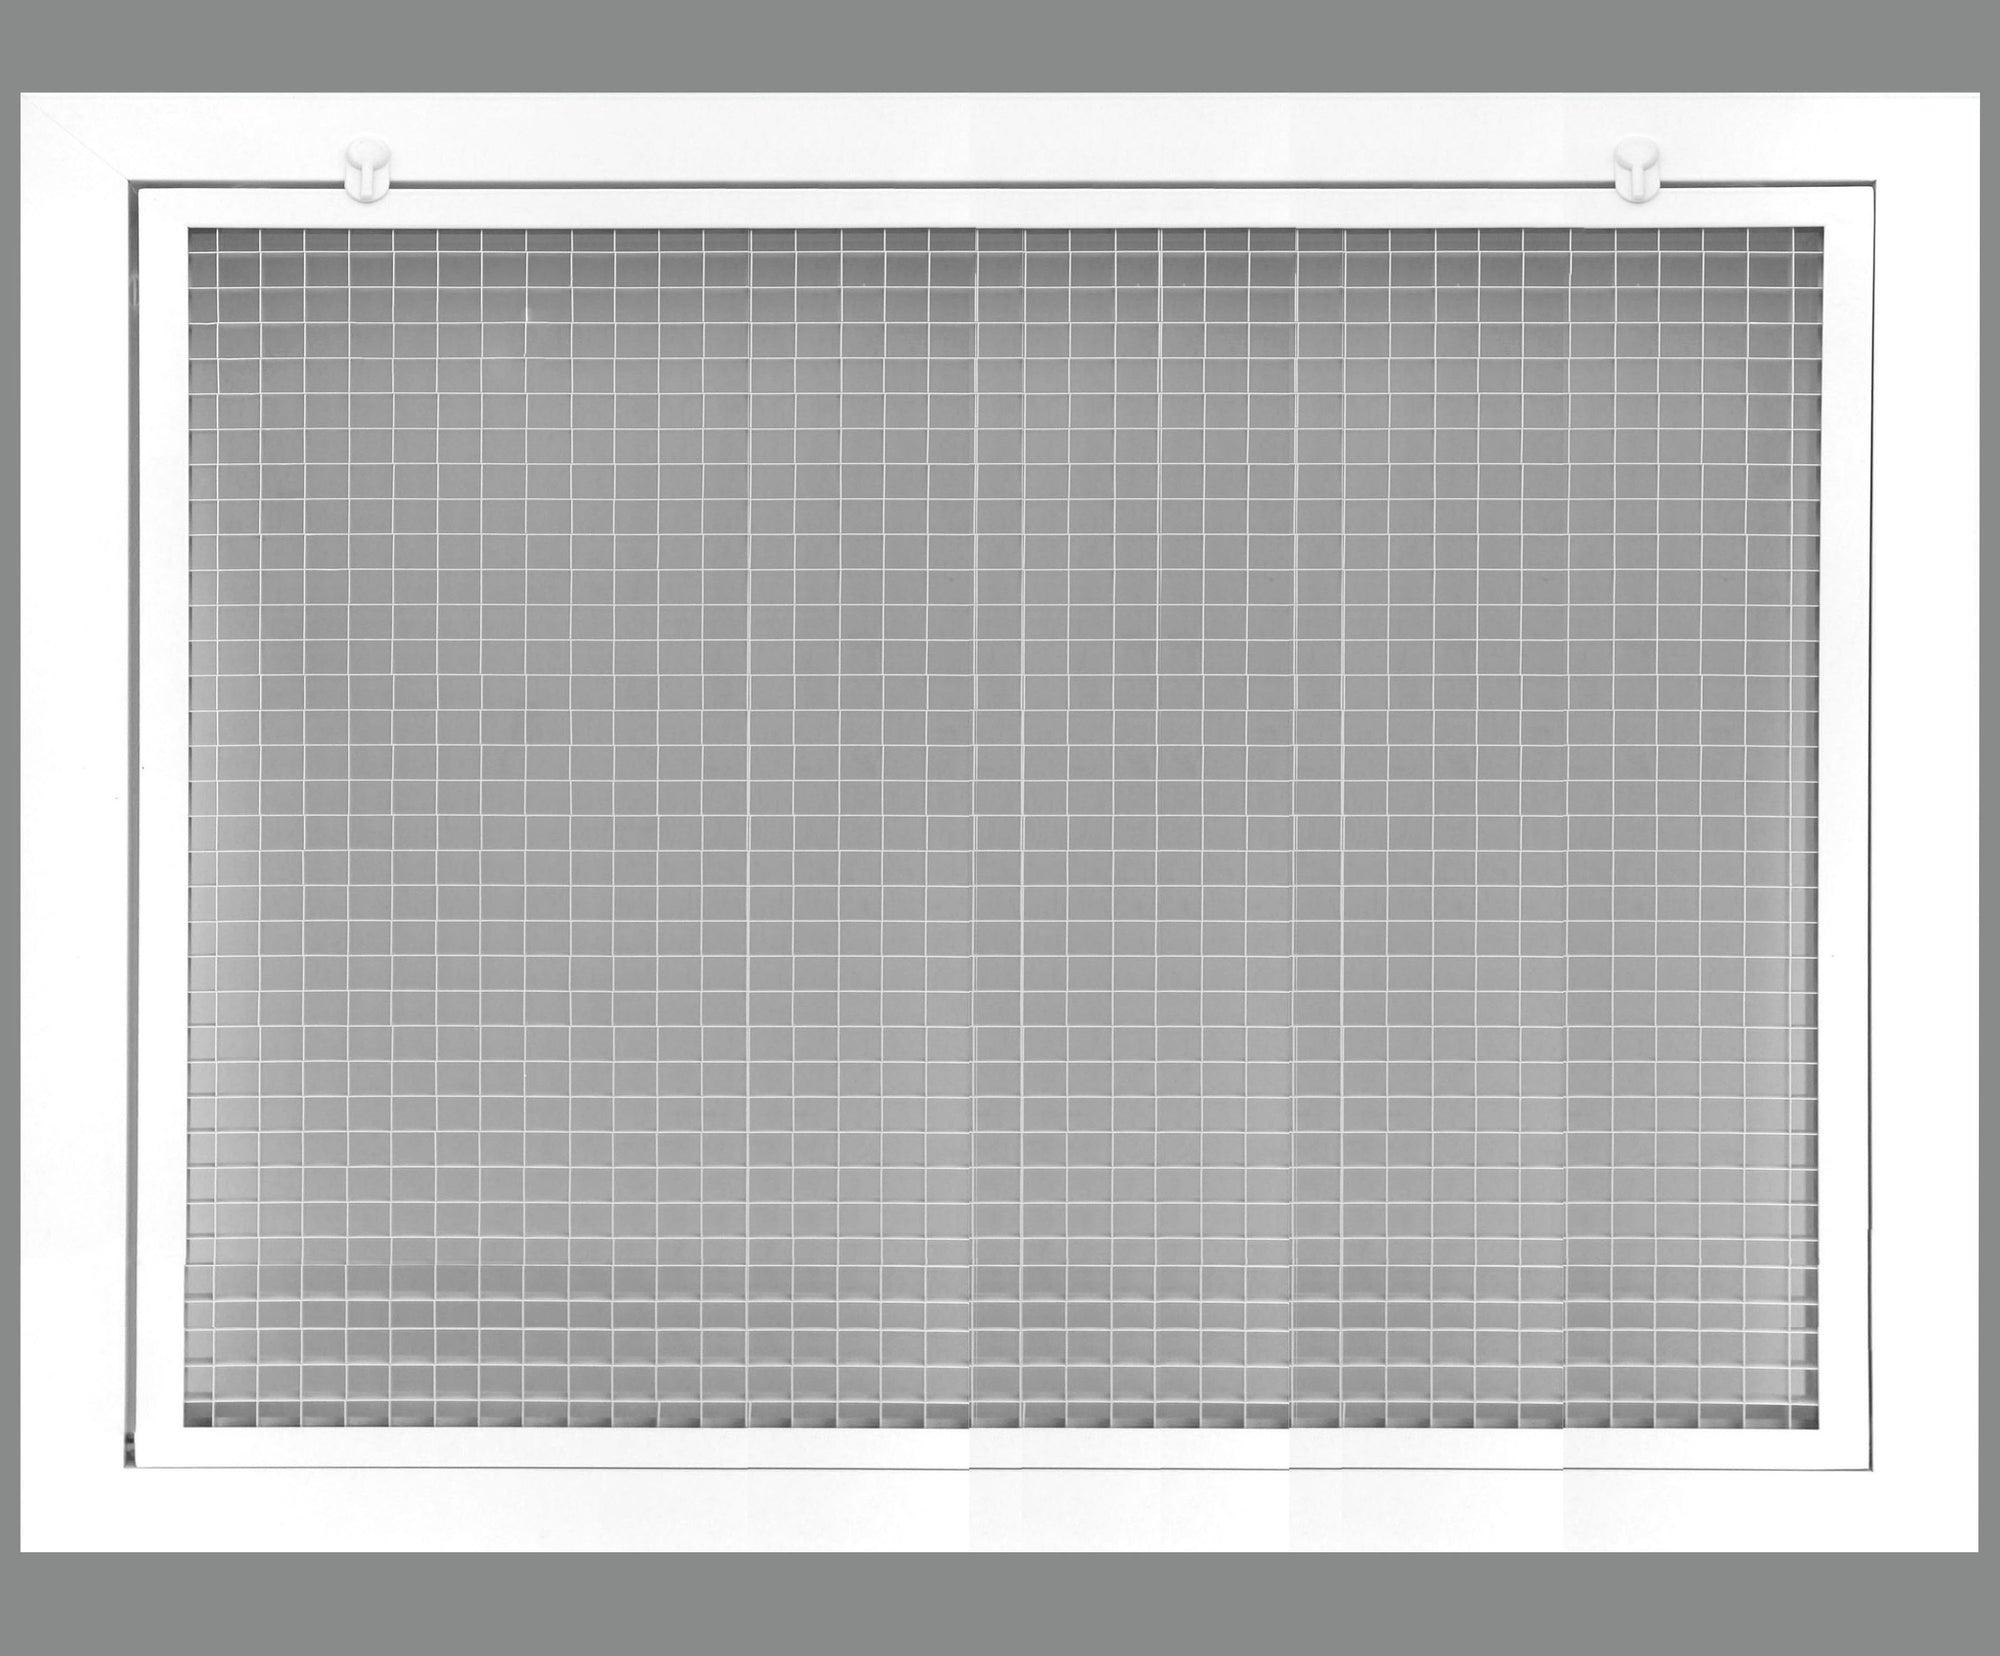 26" x 22" Cube Core Eggcrate Return Air Filter Grille for 1" Filter